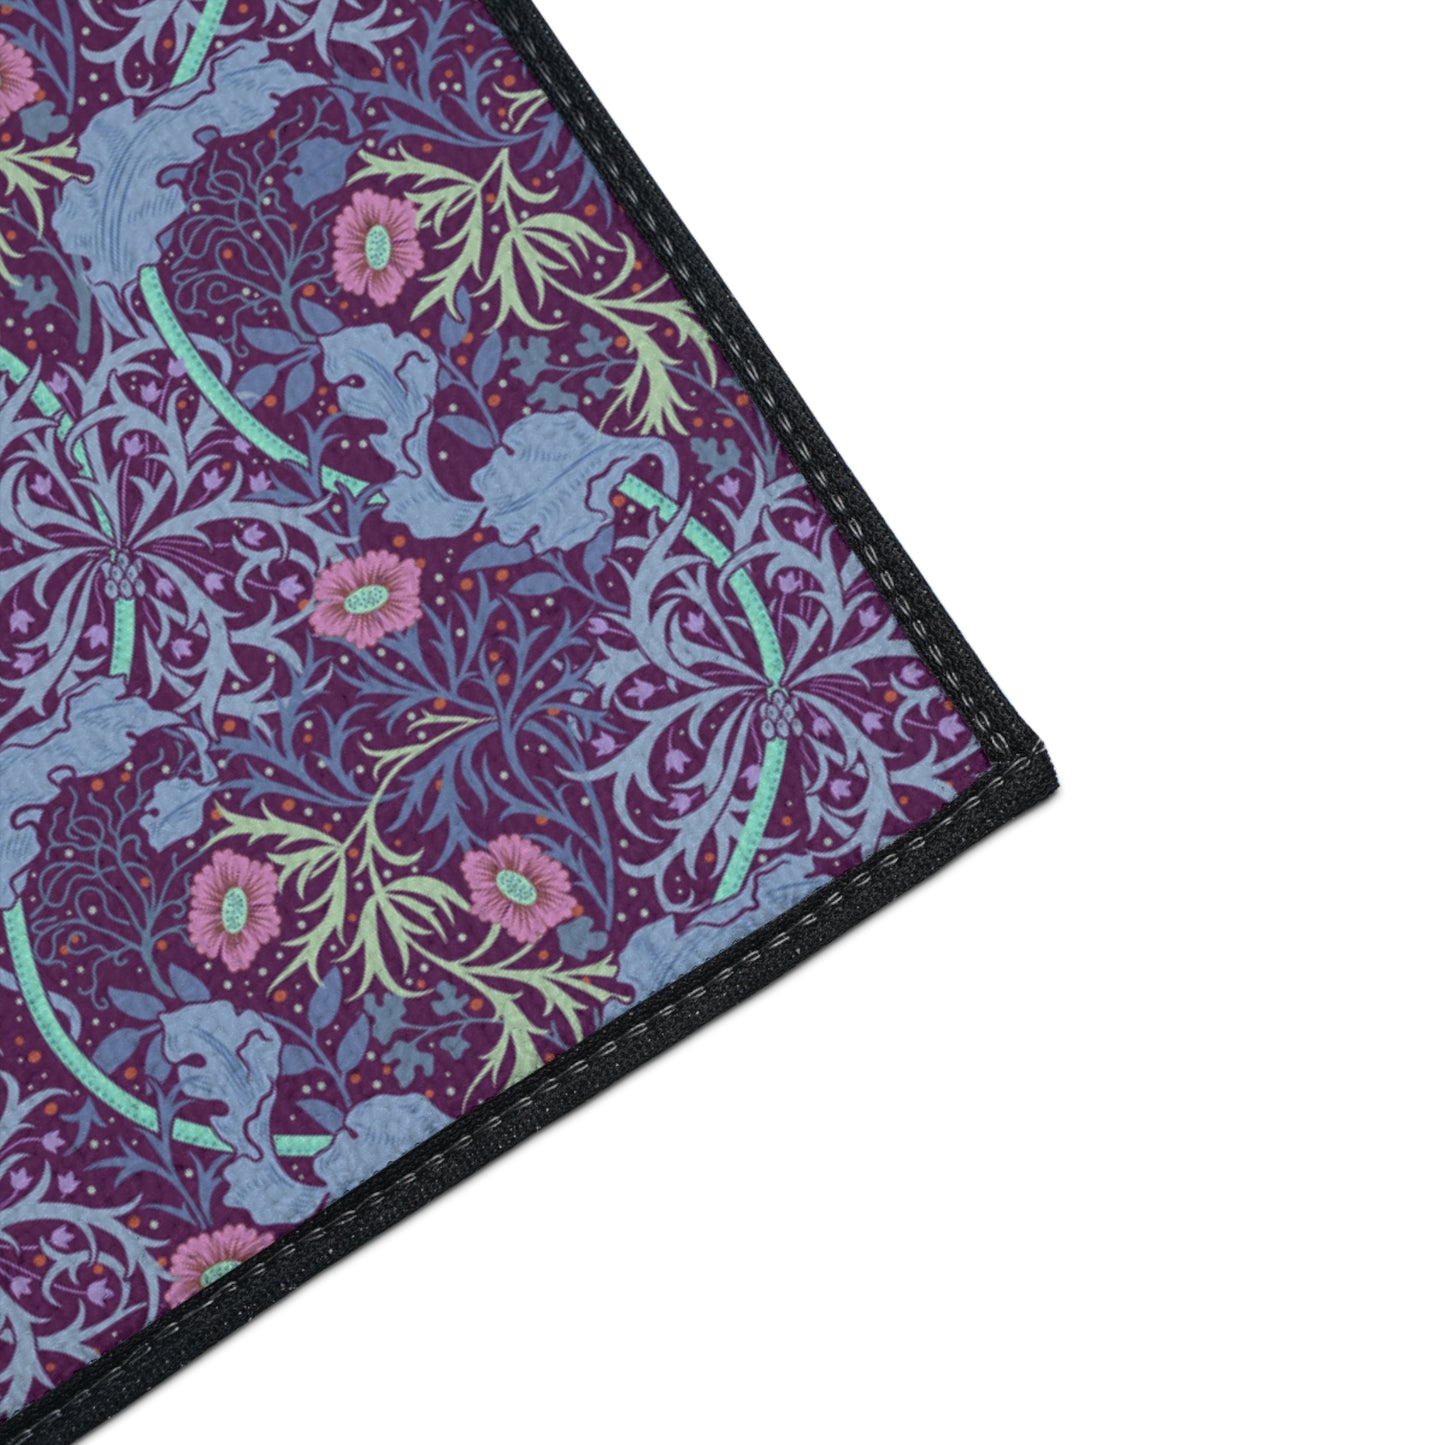 william-morris-co-heavy-duty-floor-mat-seaweed-collection-pink-flowers-10